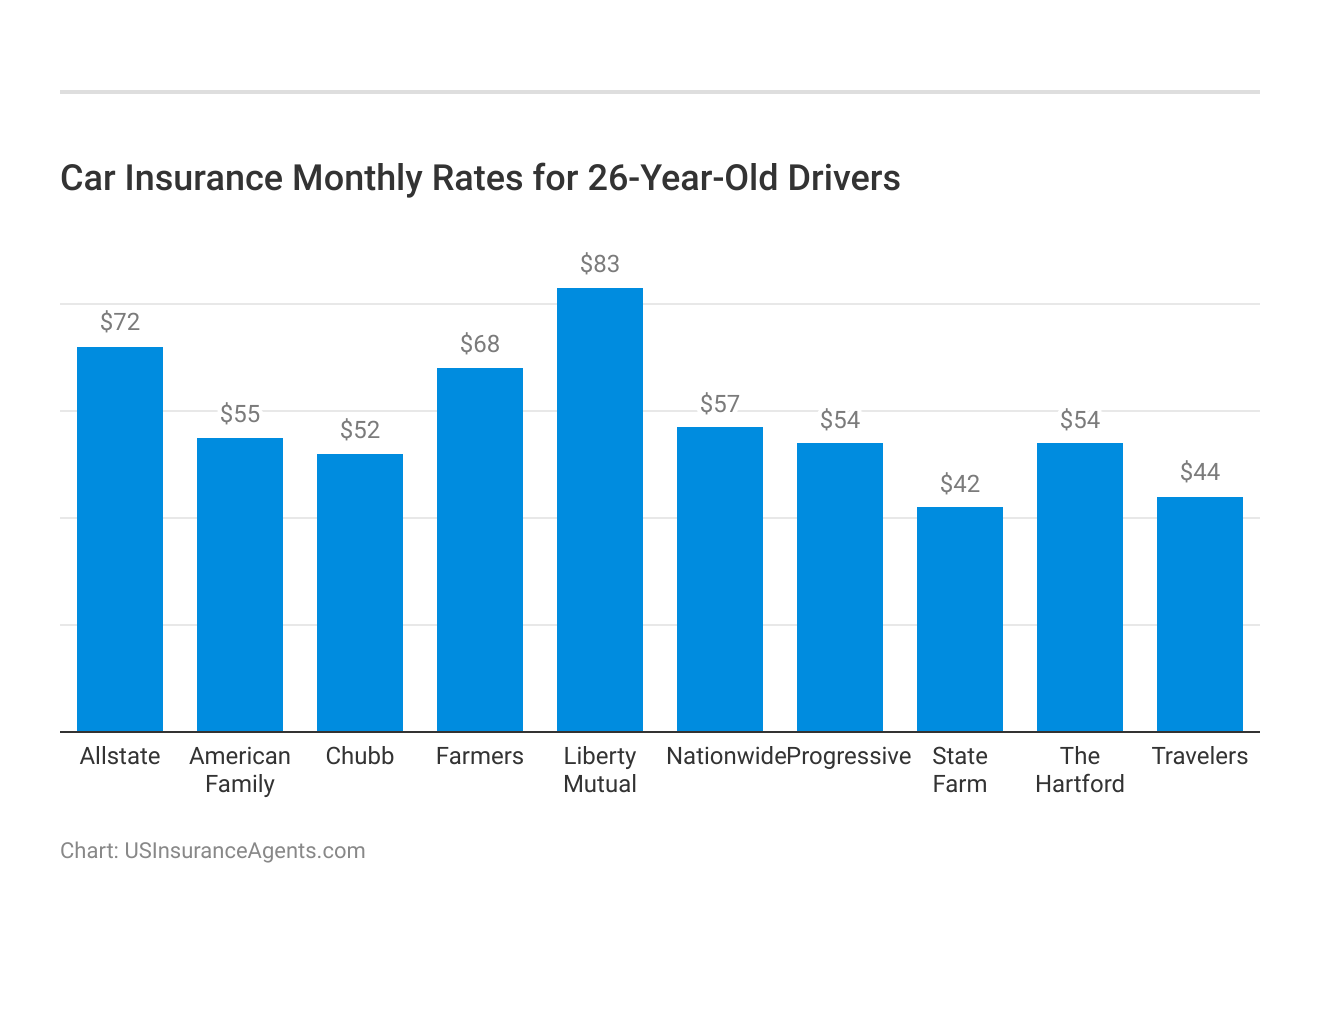 <h3>Car Insurance Monthly Rates for 26-Year-Old Drivers</h3>